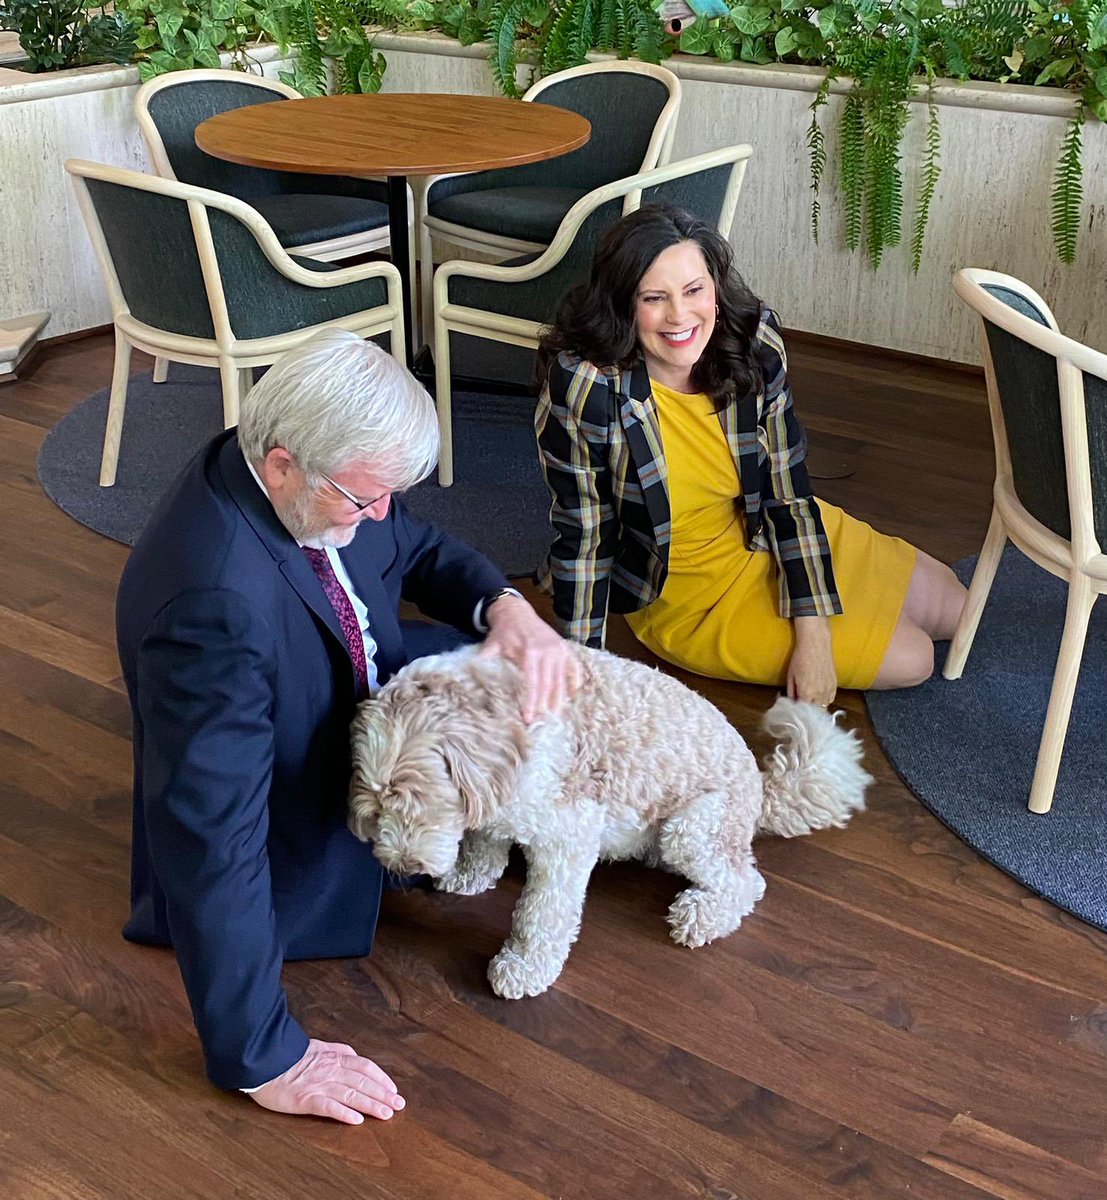 In Lansing today for lunch with Governor Gretchen Whitmer, or “Big Gretch” to Michiganders! Her Great Lakes state and Australia work closely on autos, batteries, hydrogen and so much more. Also met the first dog of Michigan, whose name is…Kevin. He’s an Australian labradoodle!”